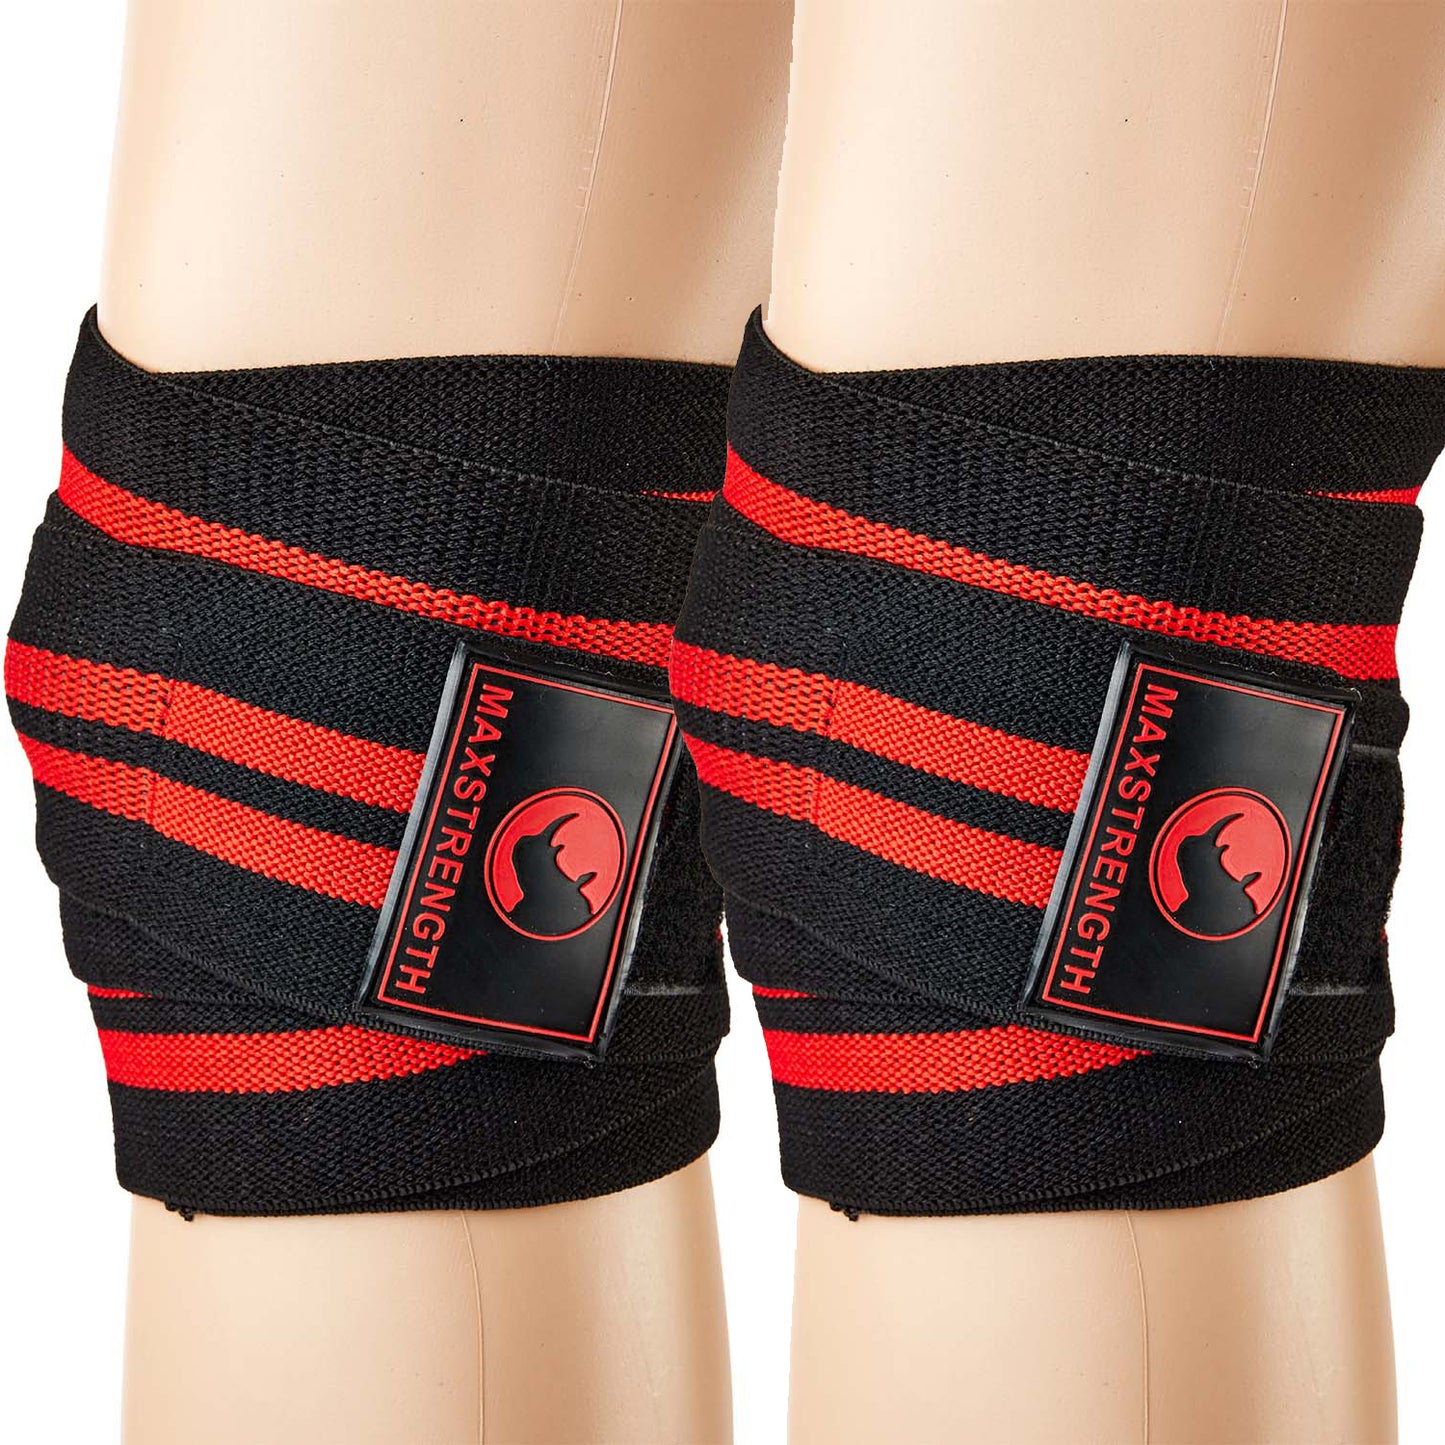 Weight Lifting knee wraps 